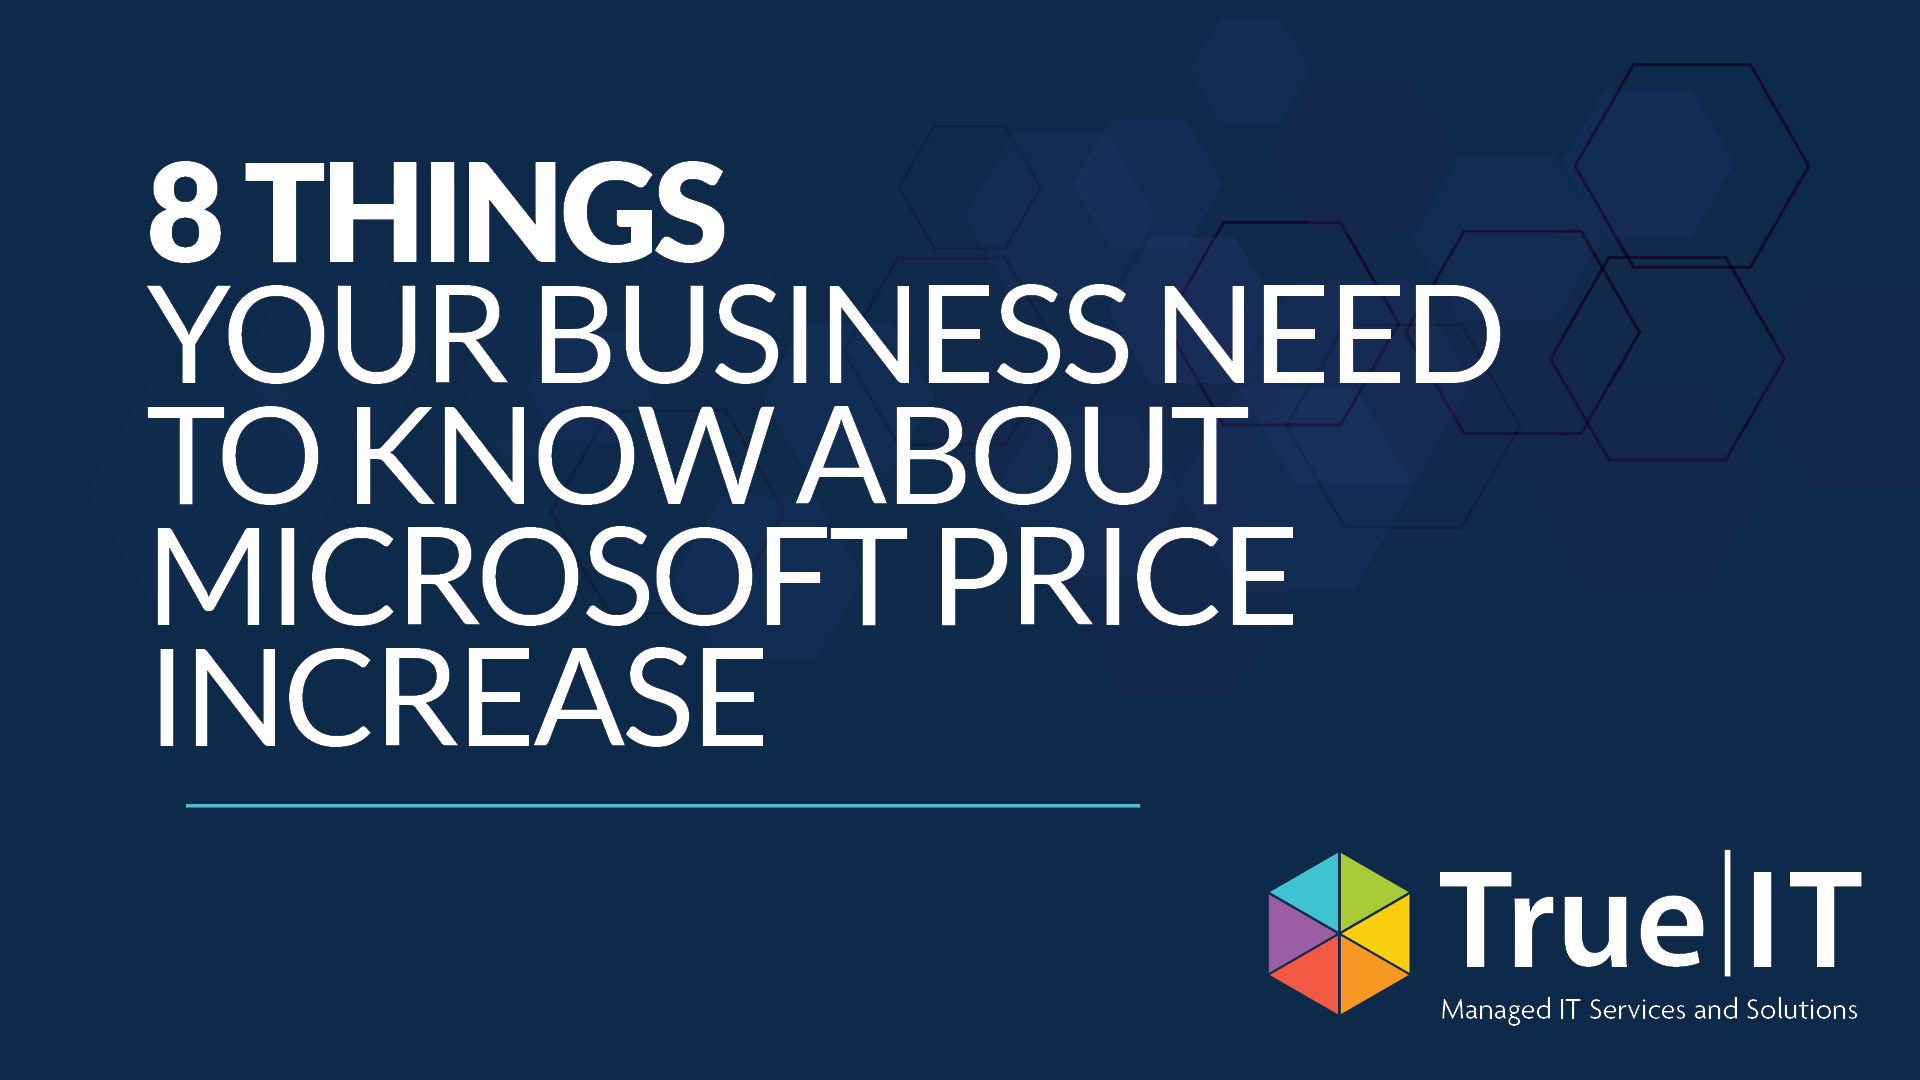 8 things to know about Microsoft's price increases